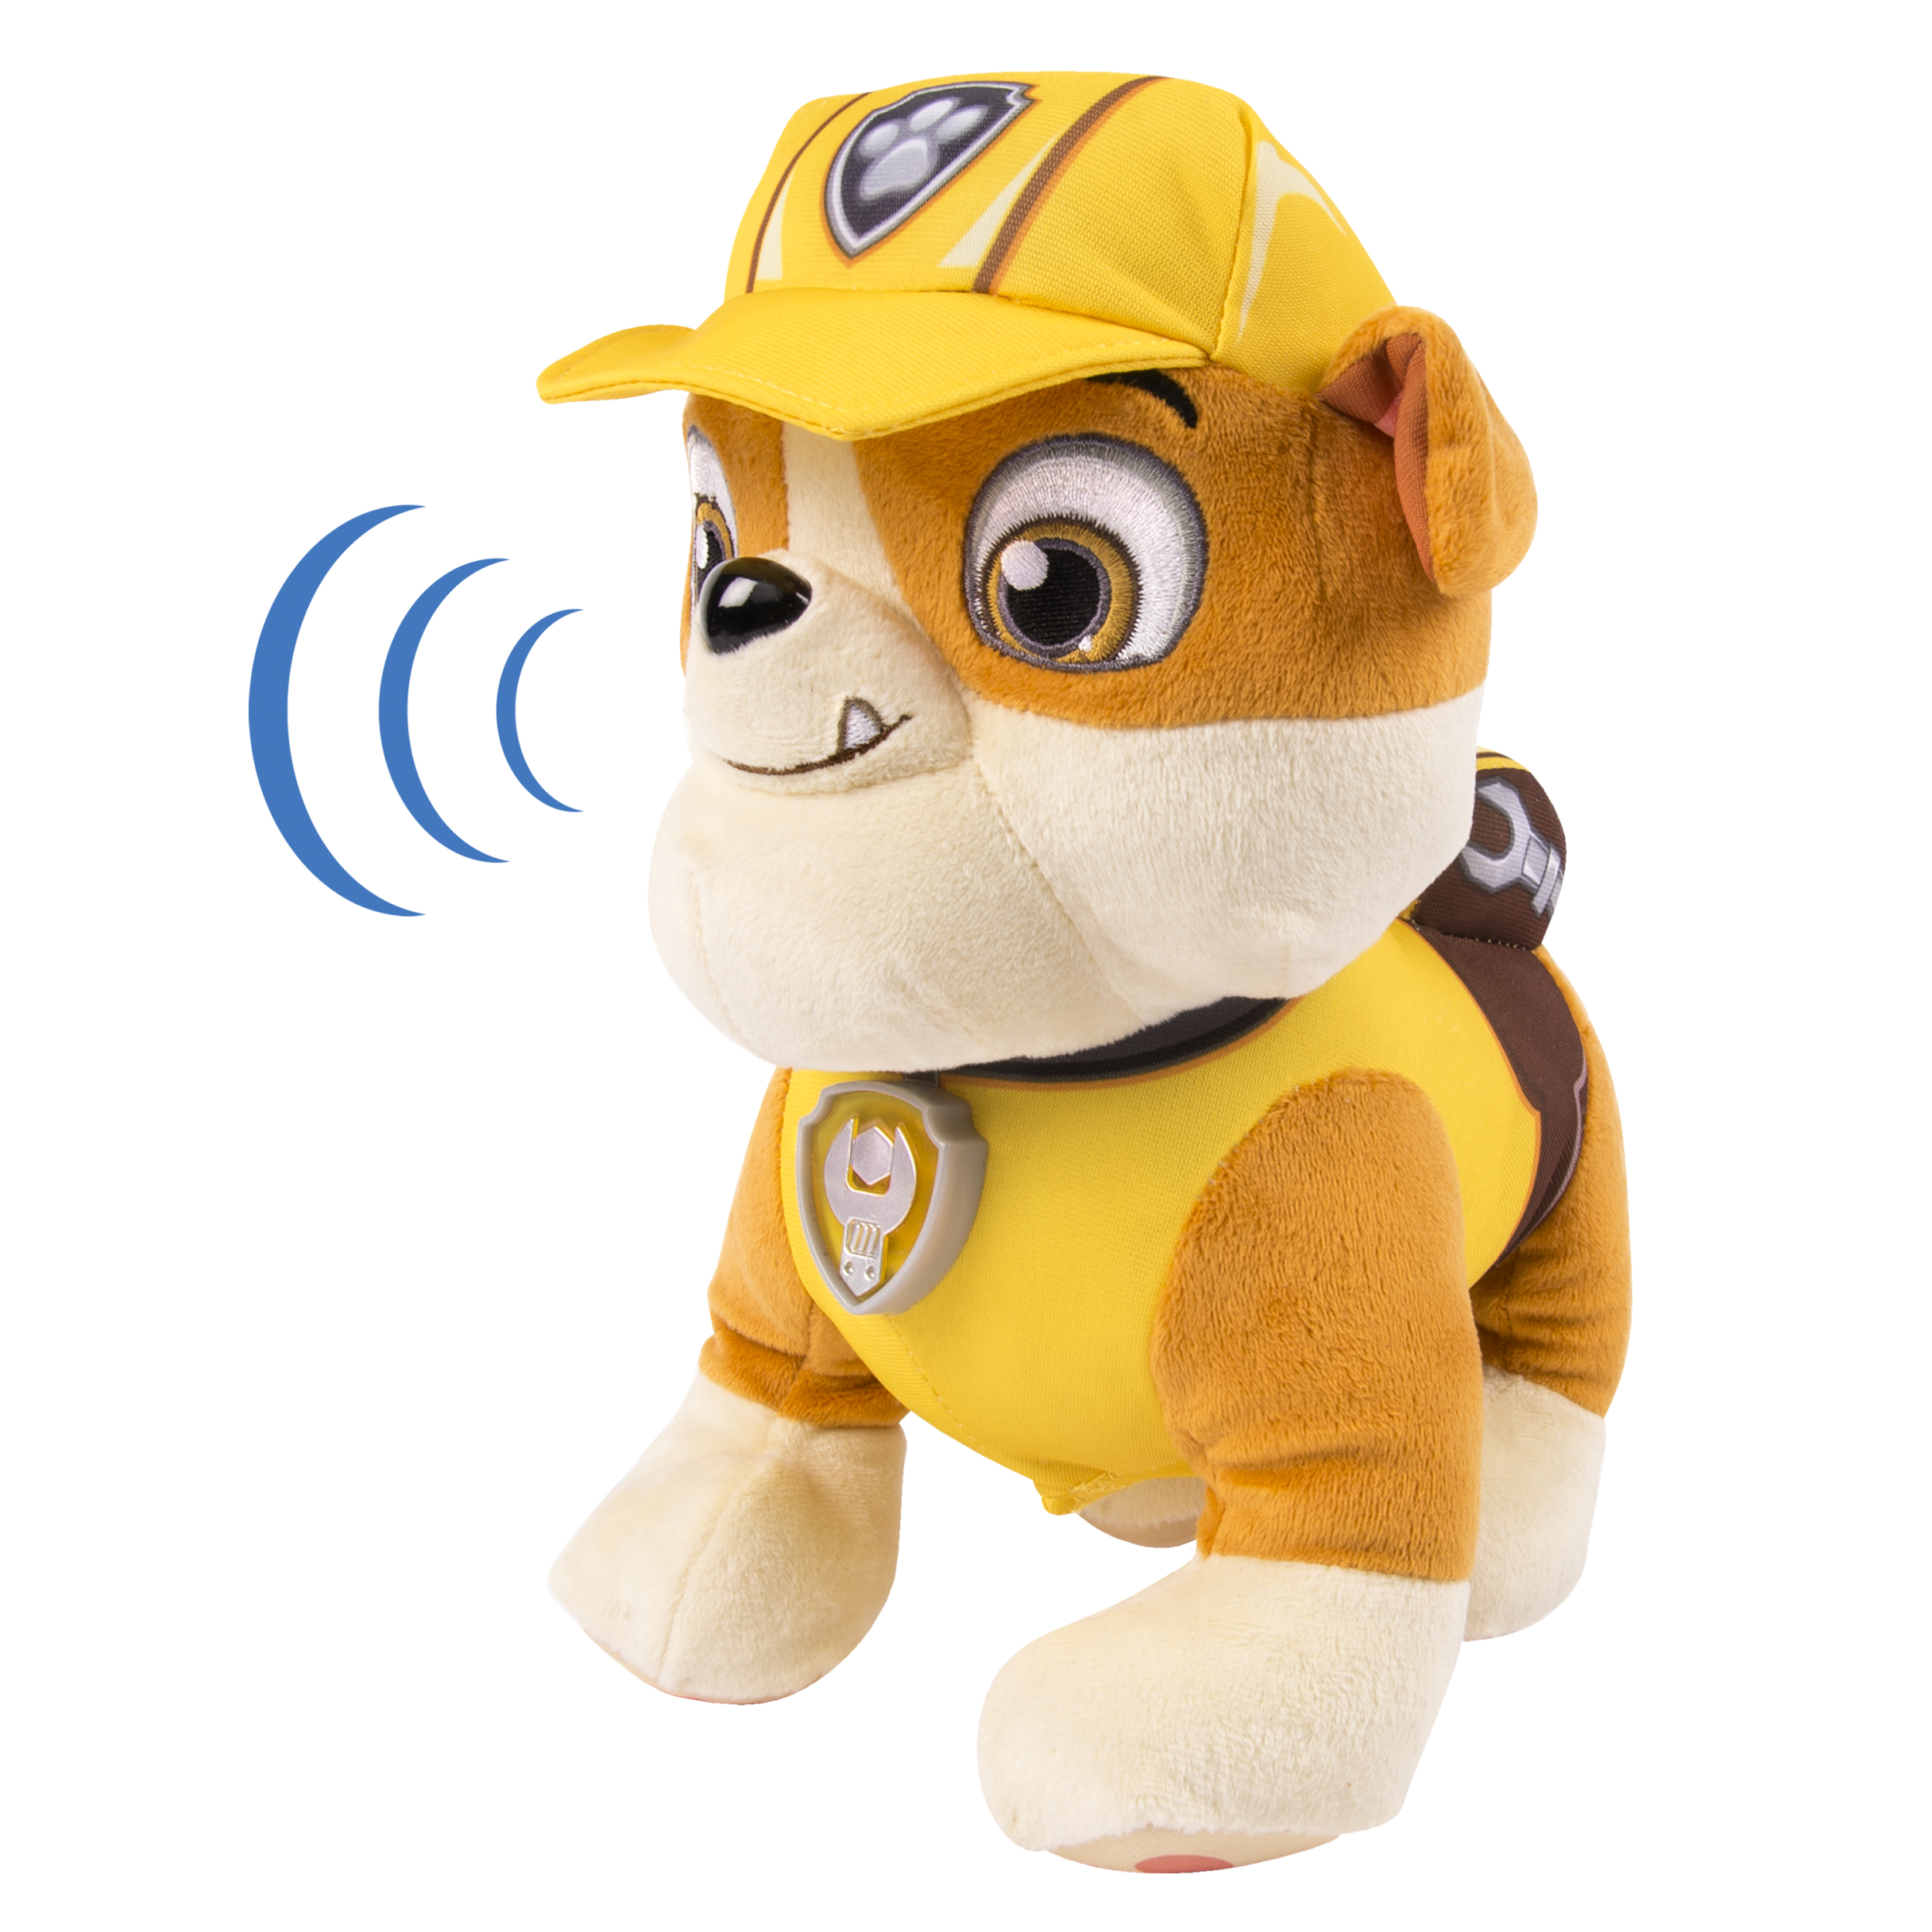 Paw Patrol Deluxe Lights and Sounds Plush, Real Talking Rubble - image 3 of 5